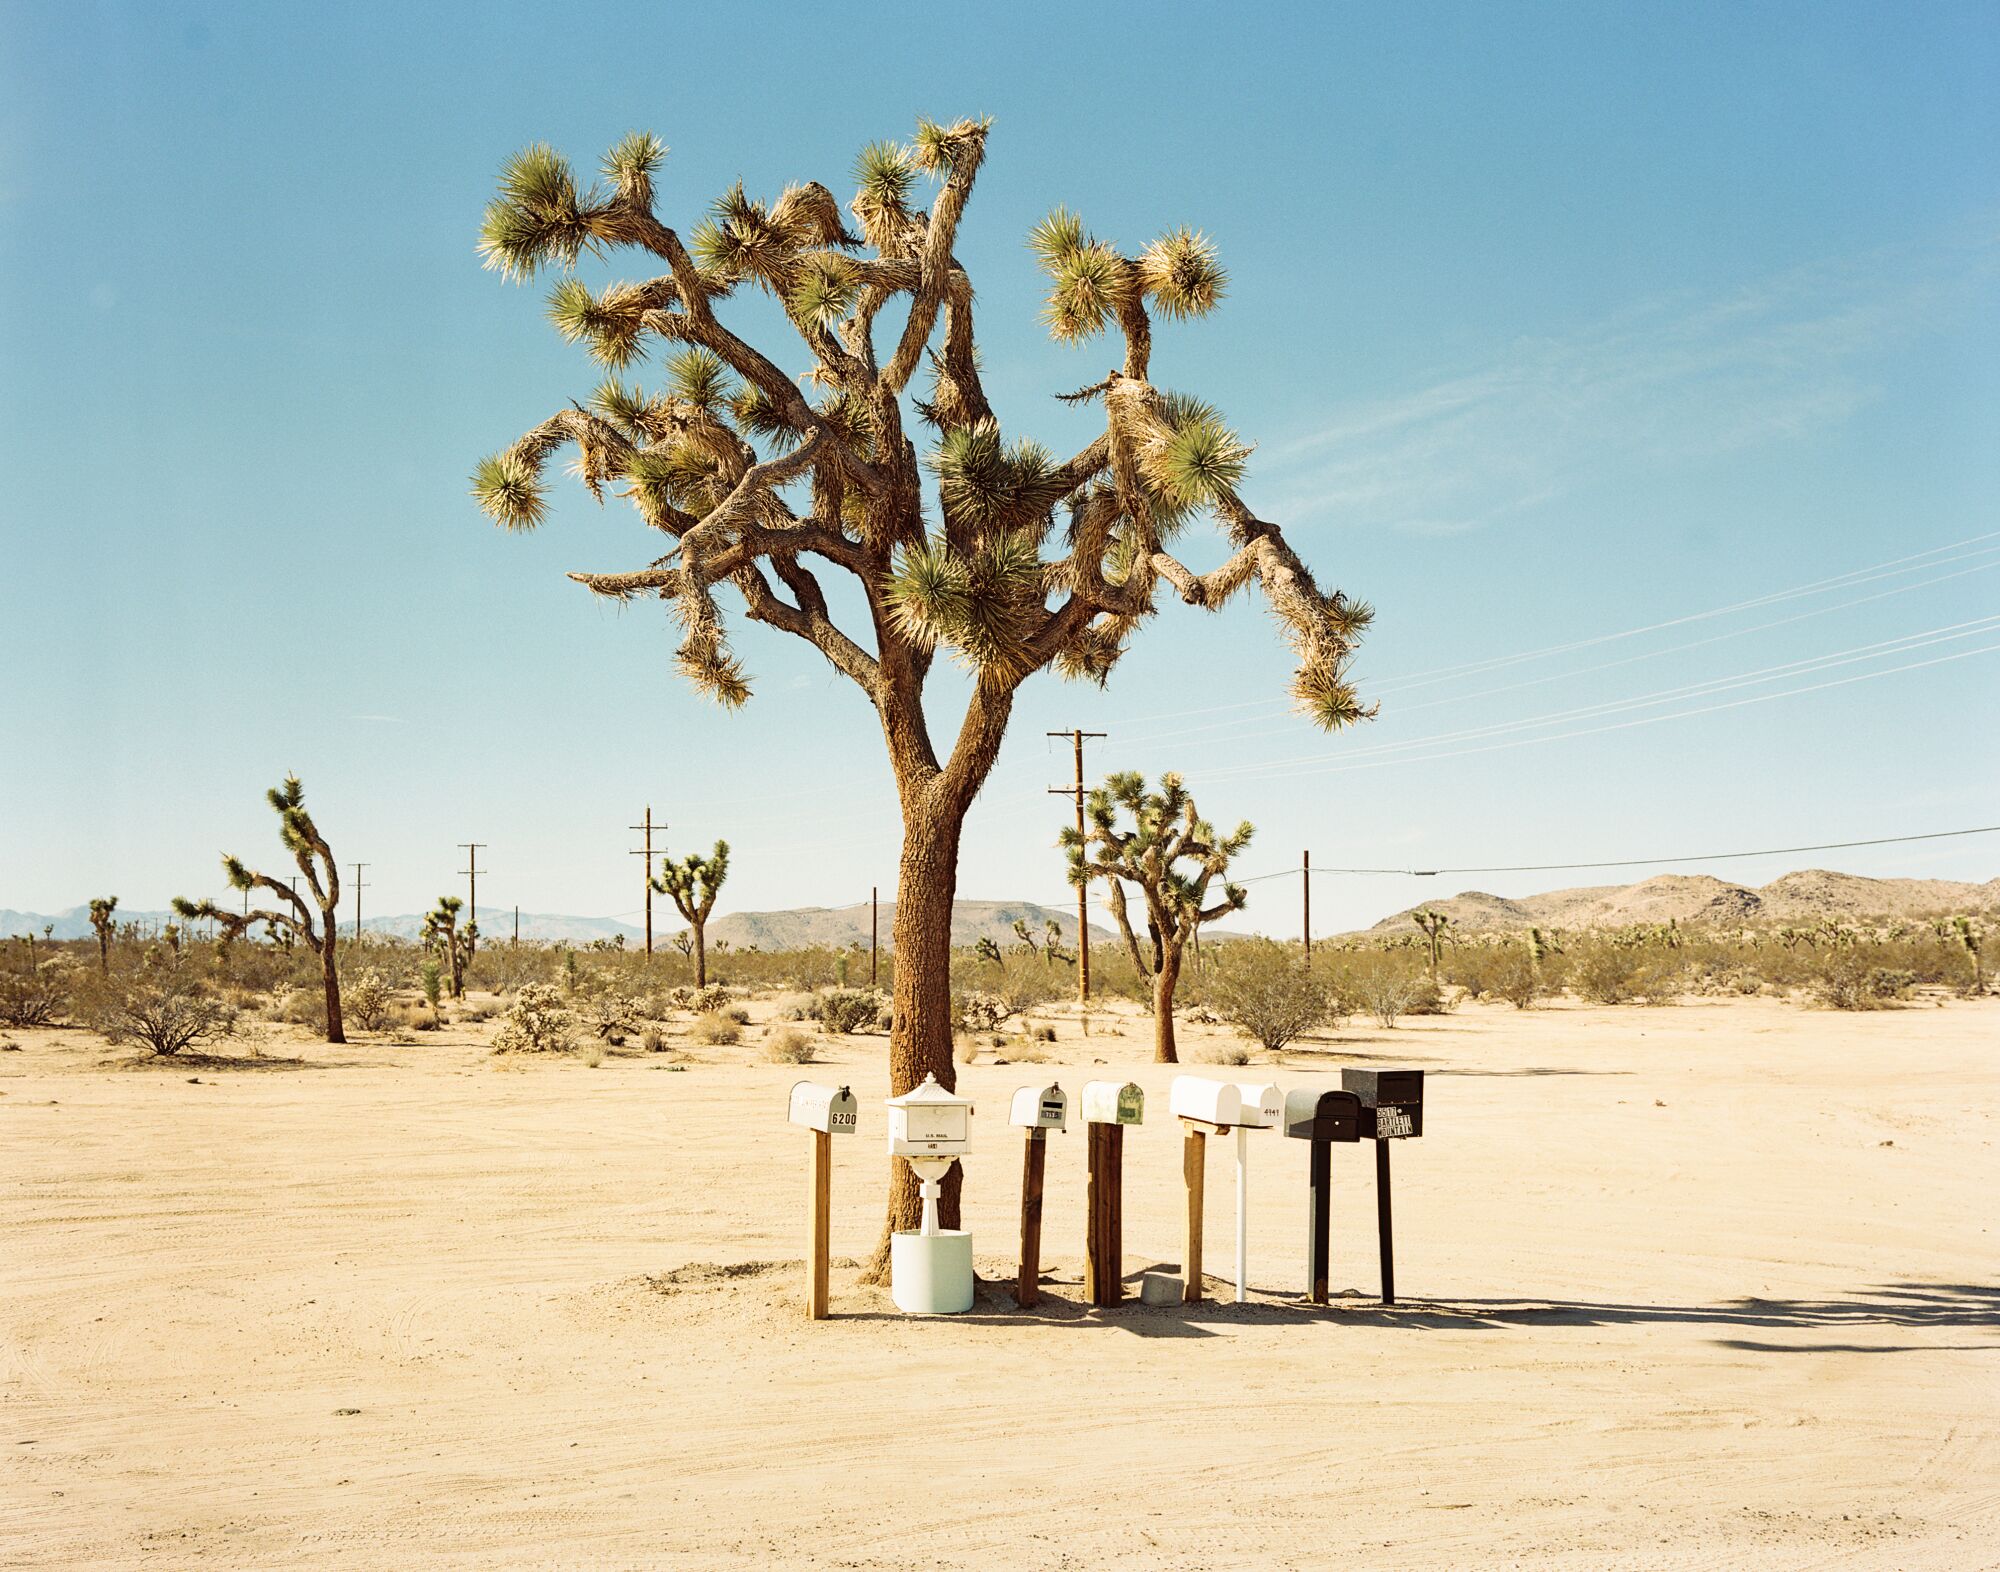 A row of mailboxes stand in front of a Joshua tree.